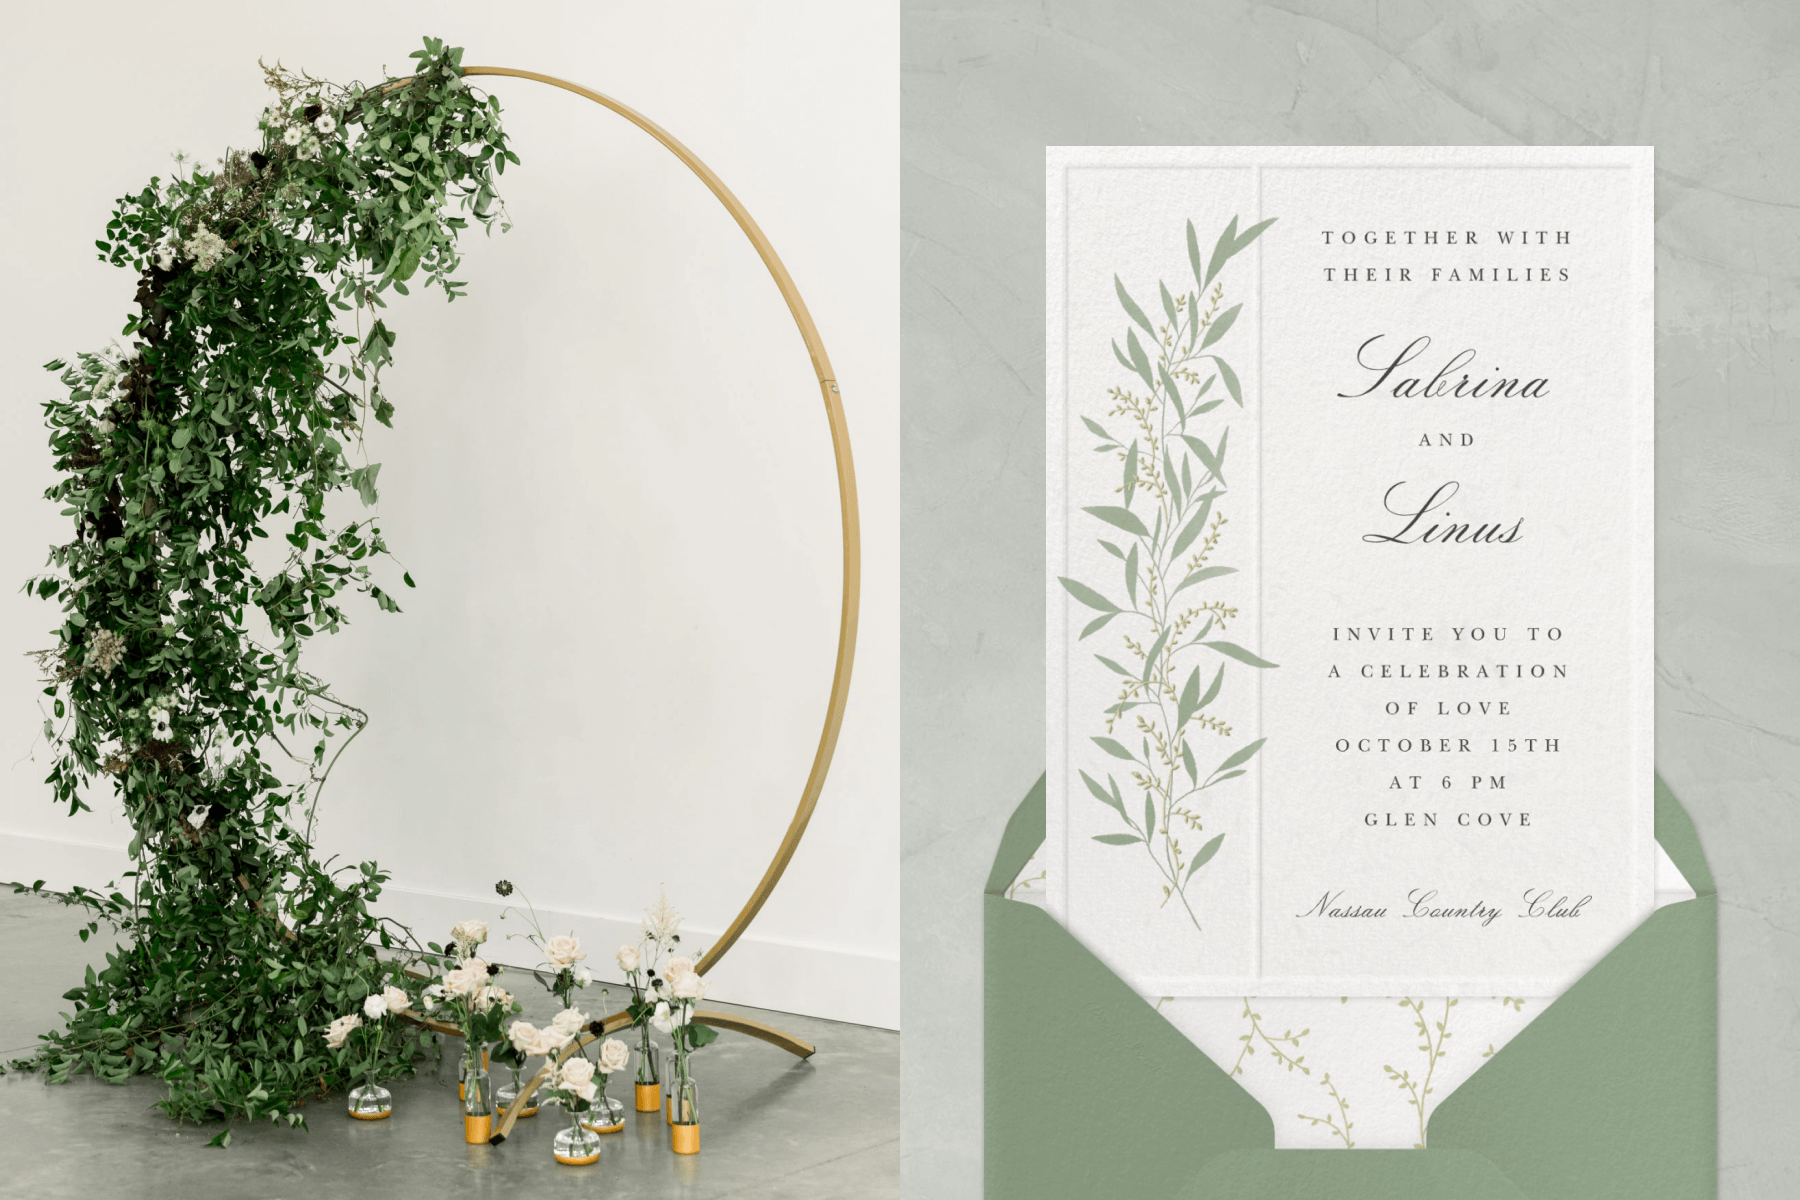 Left: A gold wedding arch with tangled greenery and white flowers cascading down one side.